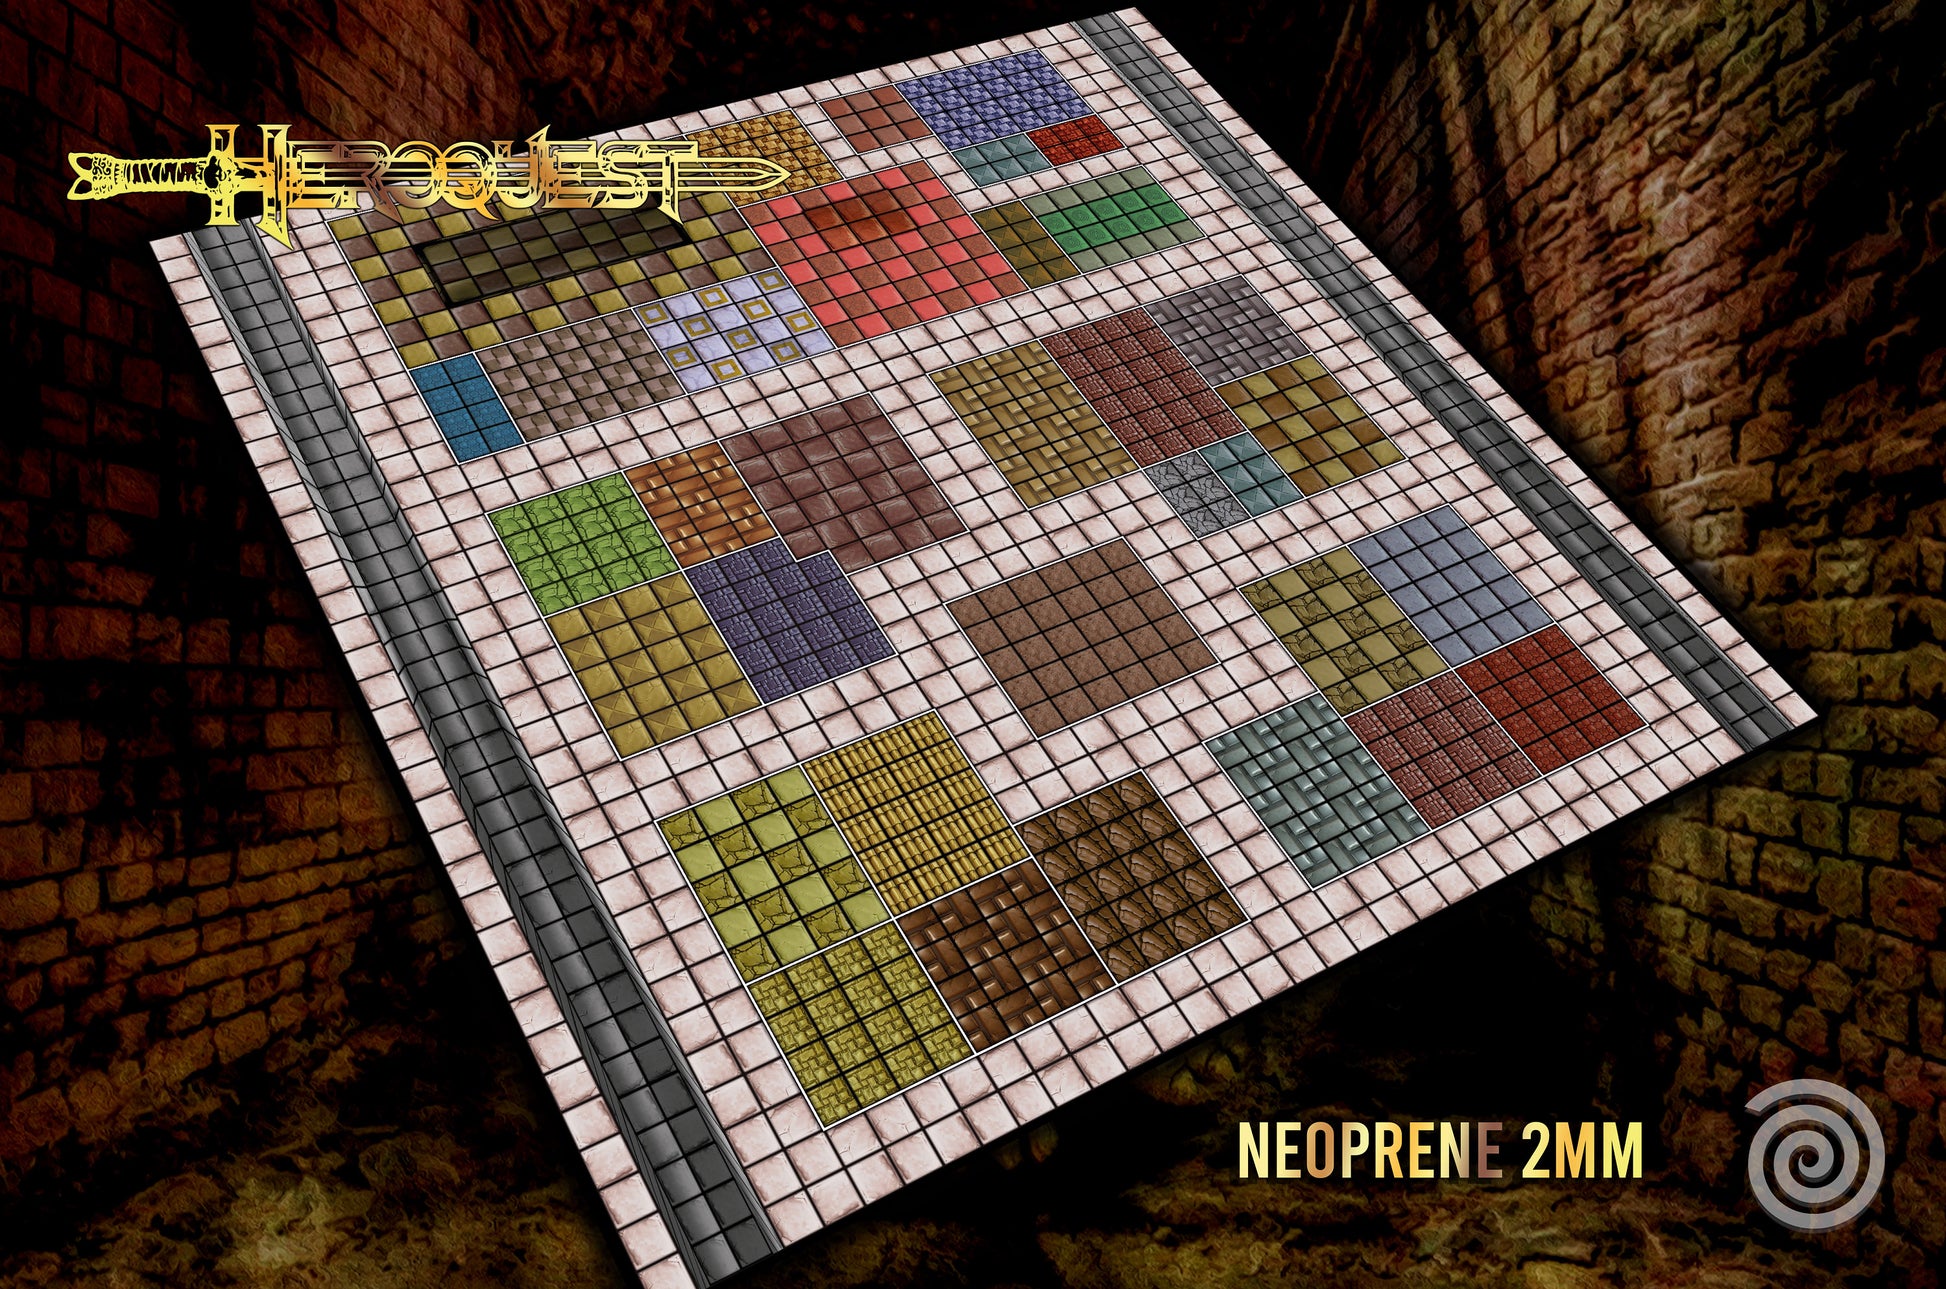 Tapete Grande Remake para HeroQuest ( 110 x 110 cm/ 43,3071 x 43,3071 inches)UNOFFICIAL PRODUCT